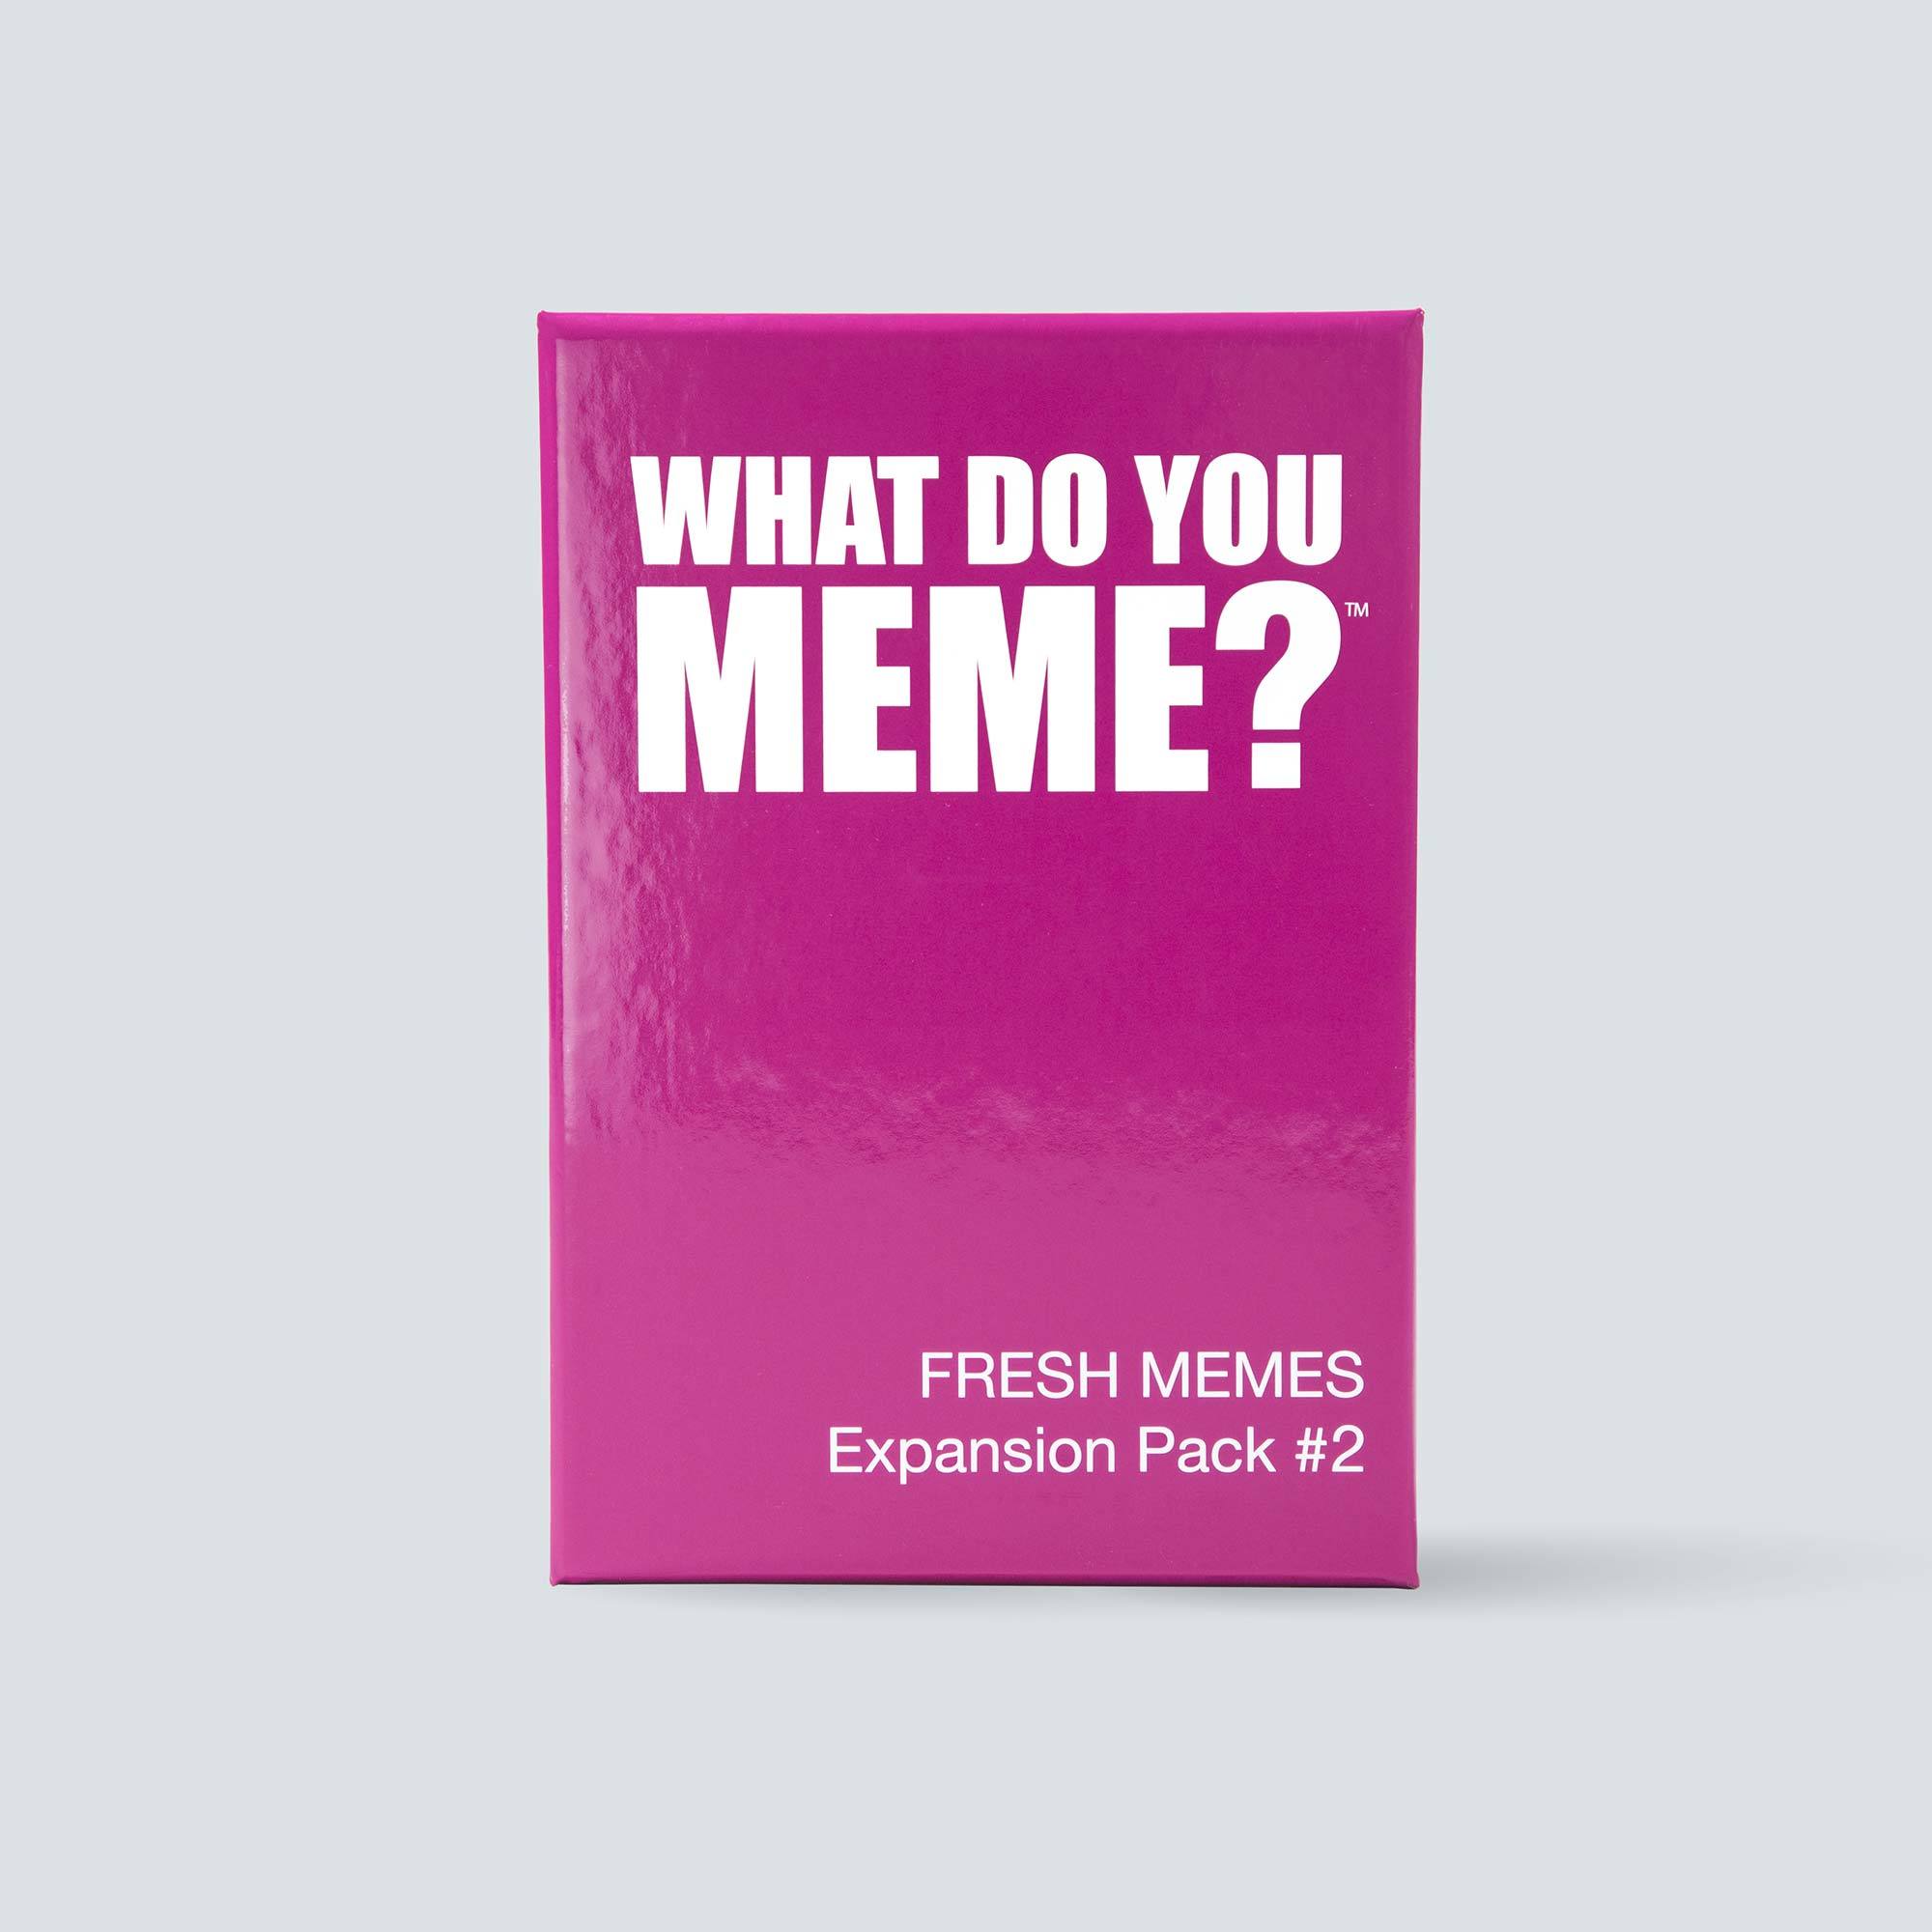 fresh-memes-2-expansion-pack-game-box-and-game-play-03-what-do-you-meme-by-relatable